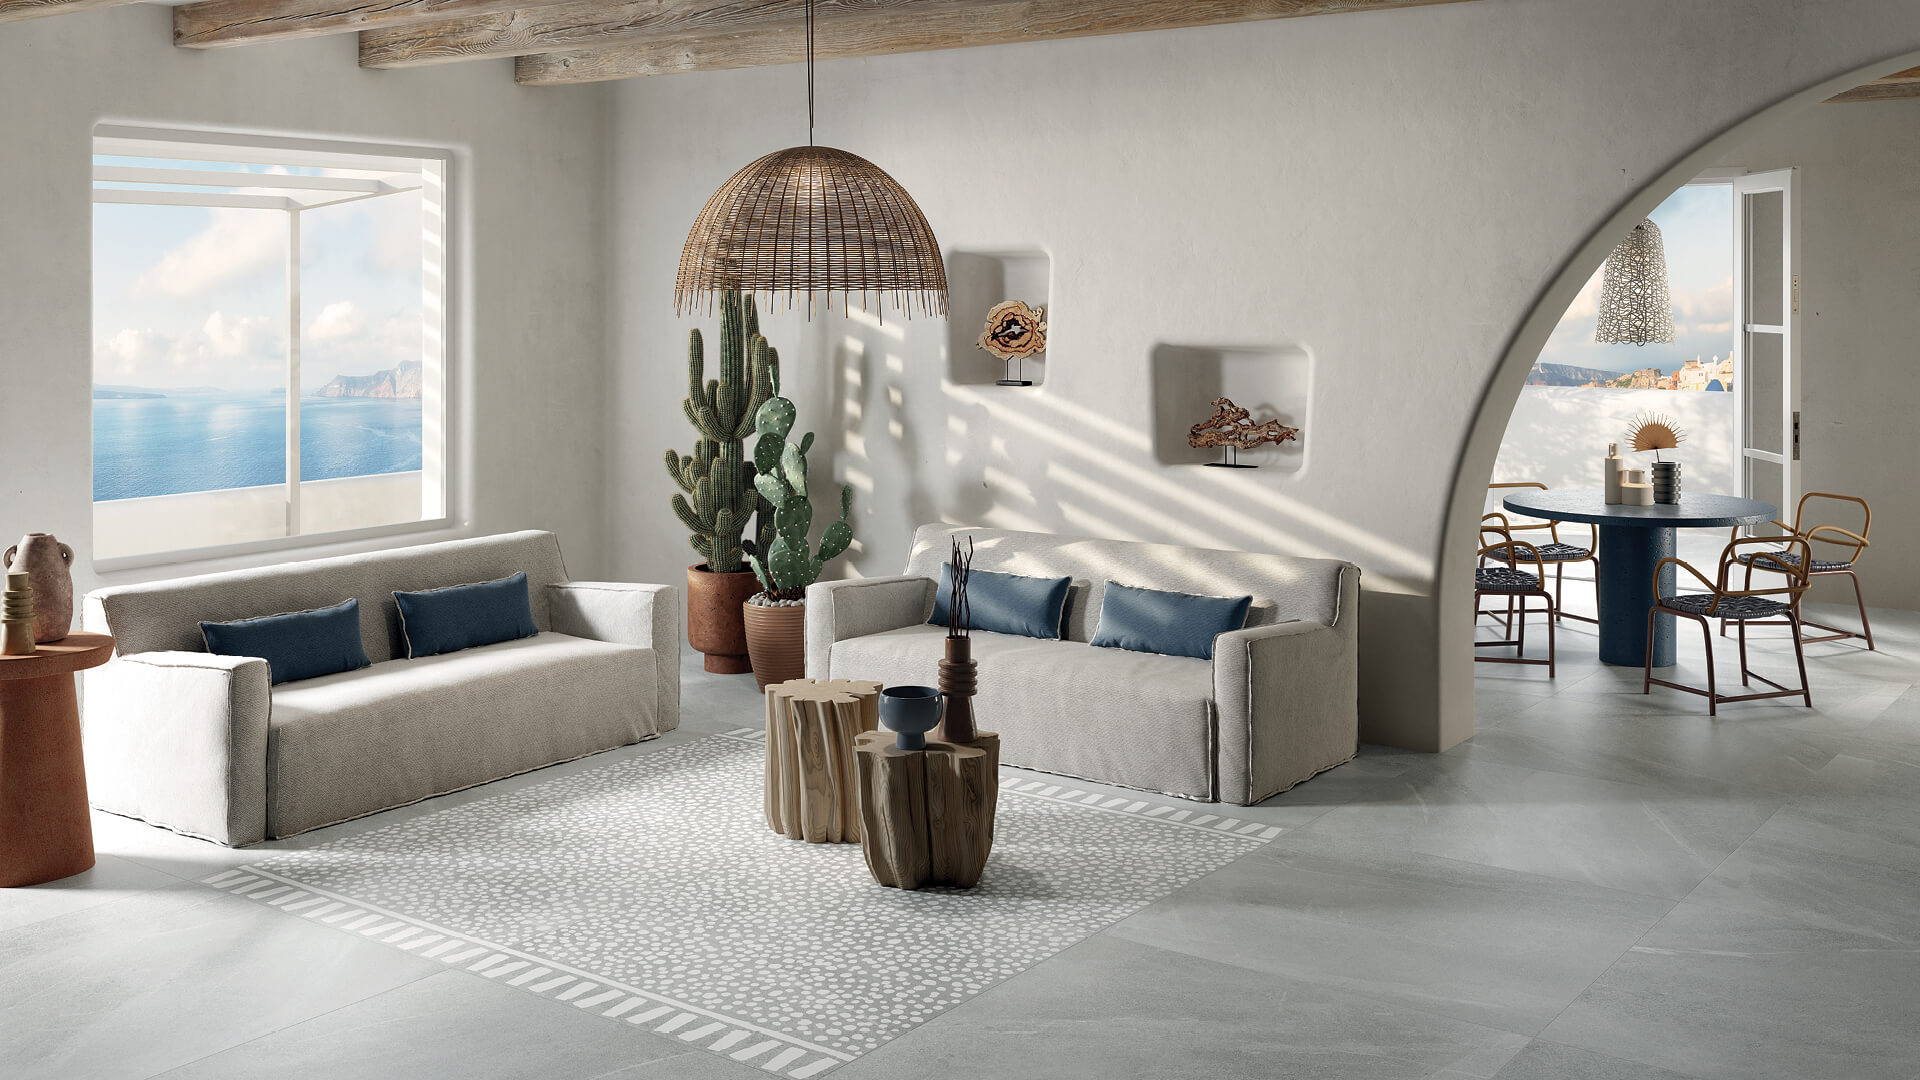 ABK x Paola Navone usher ‘Poetry House’ with two new collections